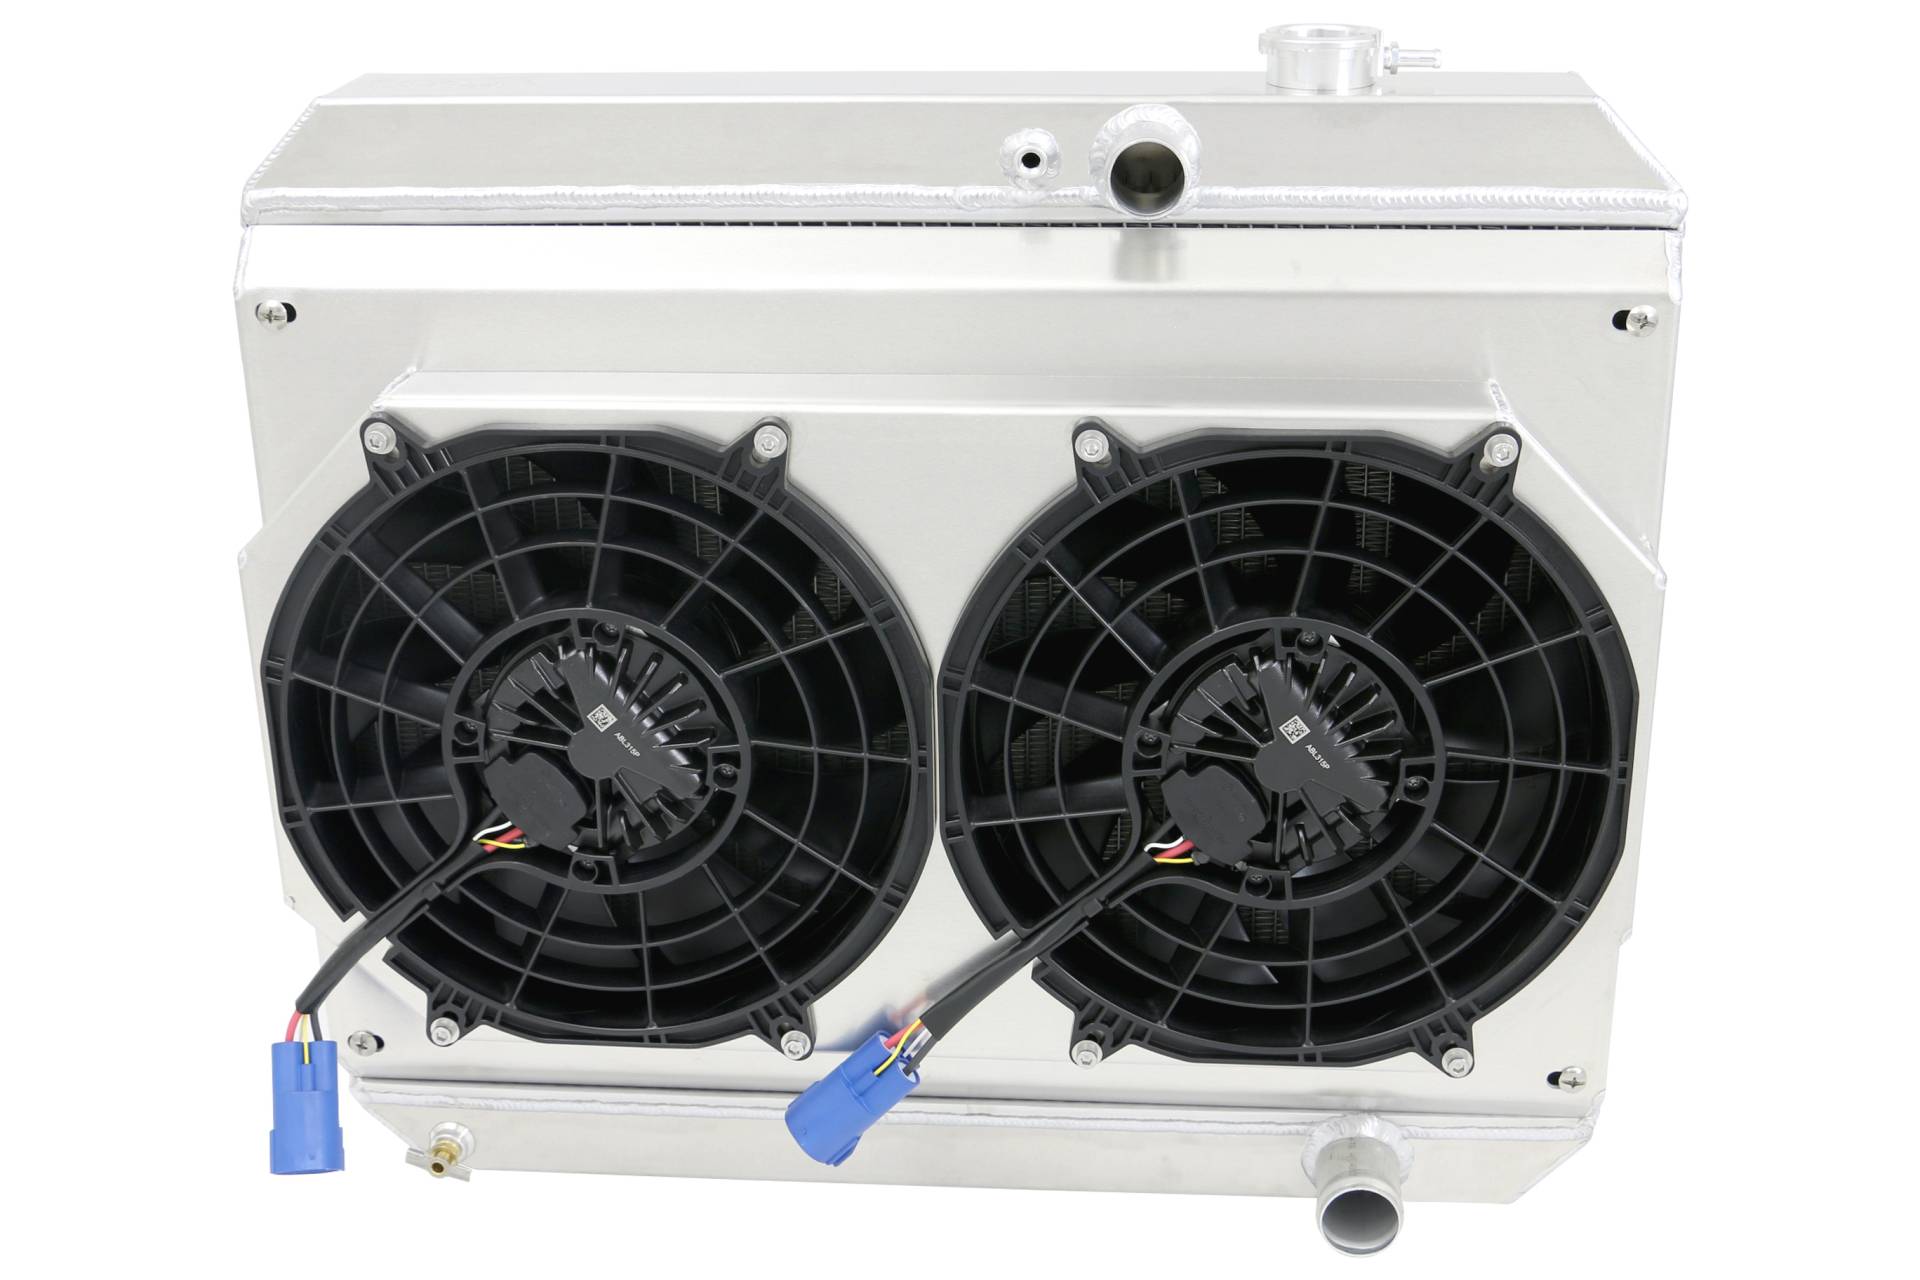 Wizard Cooling Inc - Wizard Cooling - 1965 Oldsmobile Cutlass /442 Aluminum Radiator (17.5" Core, LS Motor) With Brushless Fans - 25180-102LSBLAC